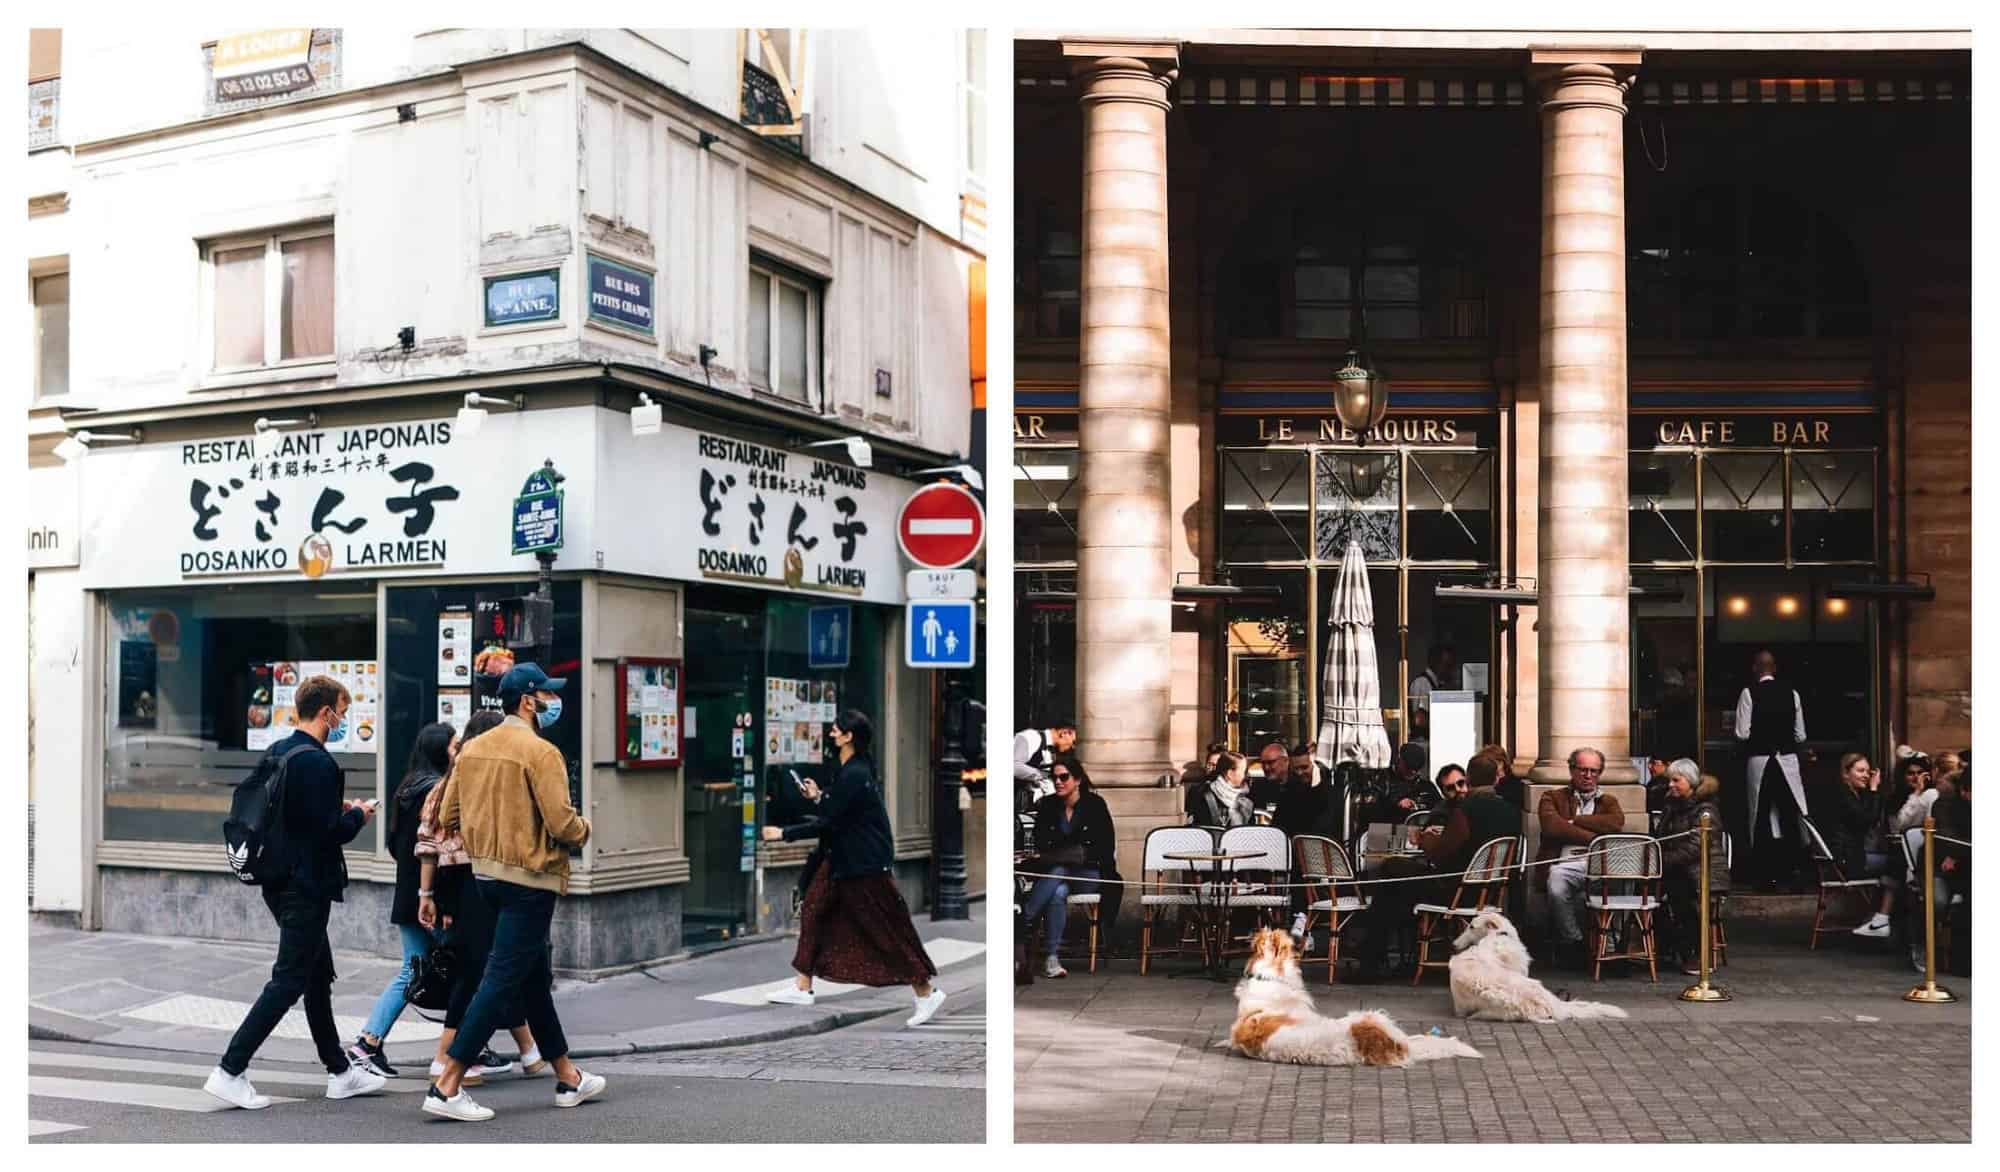 Left: 4 friends walk past a restaurant with white walls and beige finishings. Right: 2 large white dogs are sitting on the ground in front of a Parisian terrace.